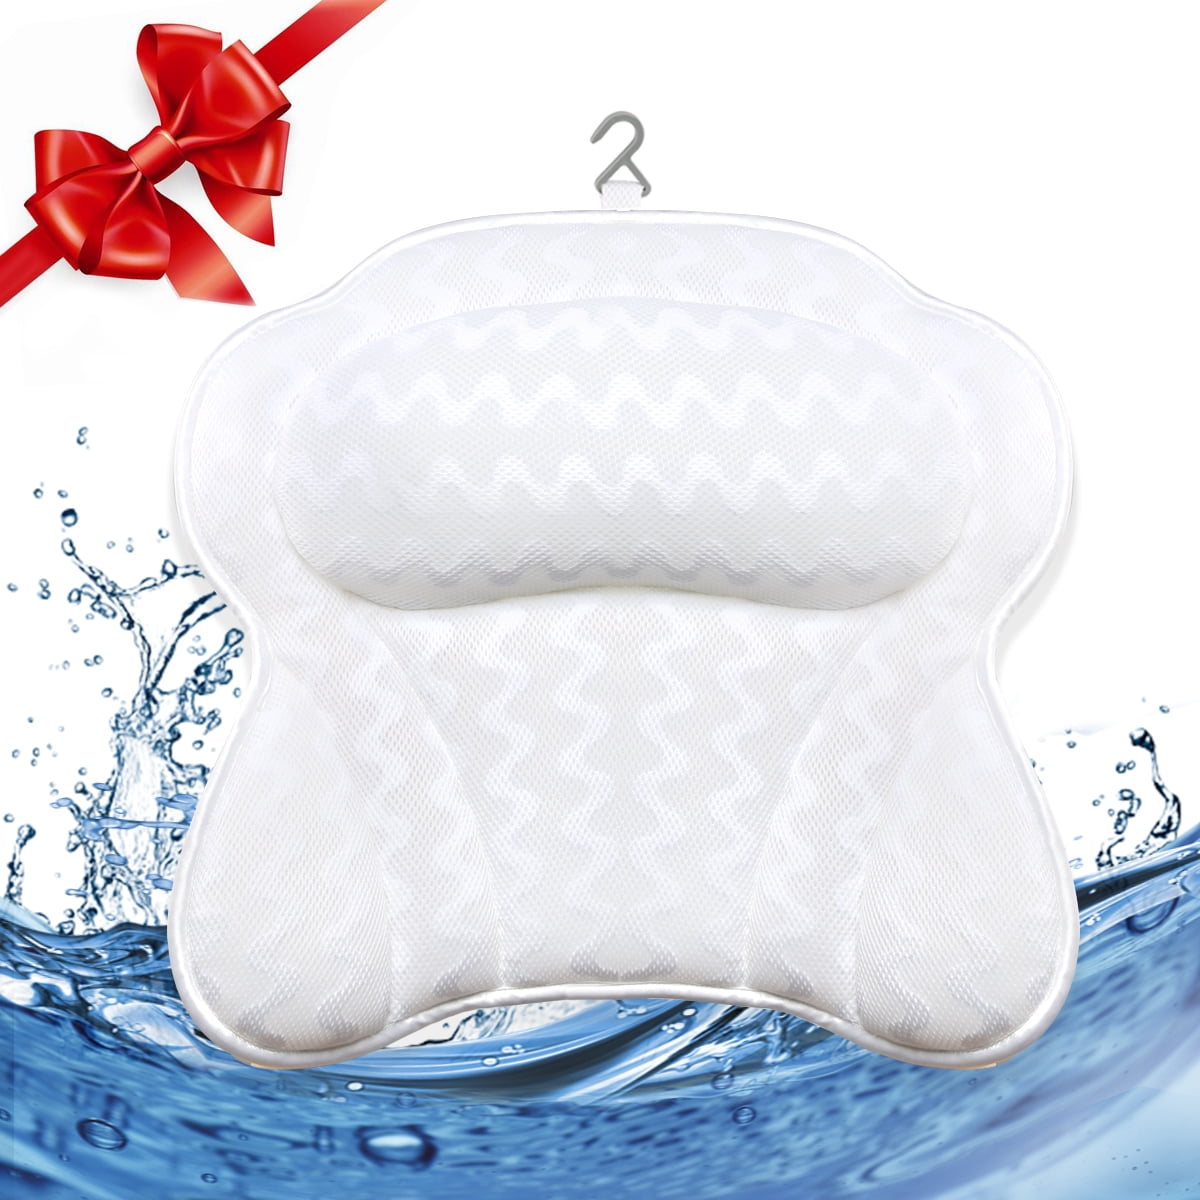 NEW Luxury Spa Bath Pillow Large FREE SHIPPING 